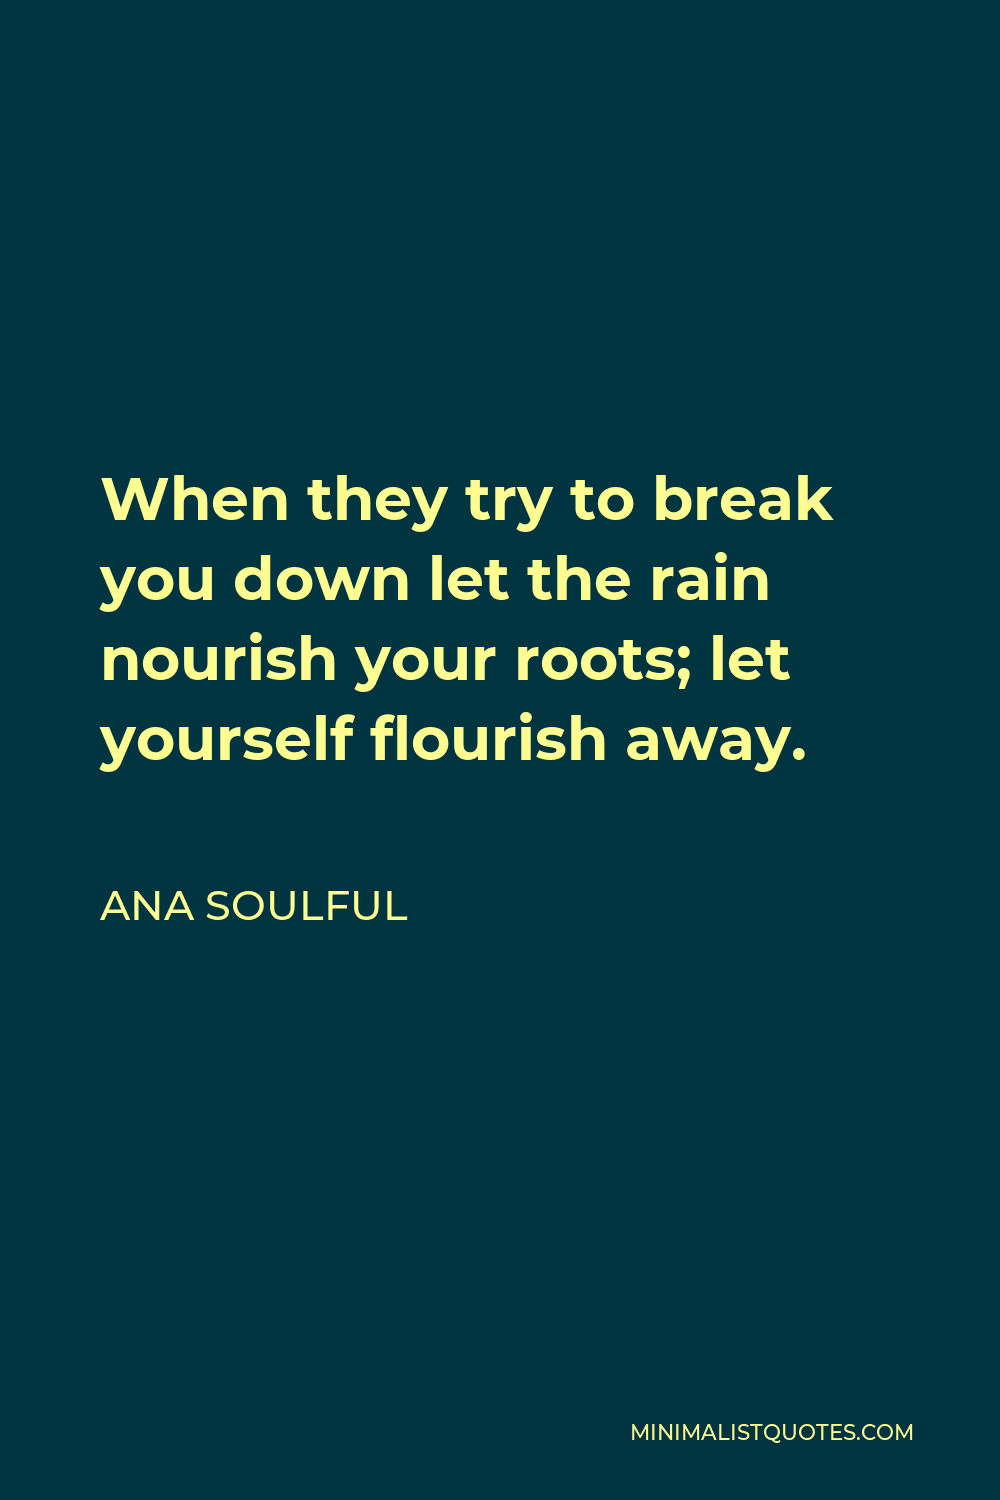 Ana Soulful Quote - When they try to break you down let the rain nourish your roots; let yourself flourish away.